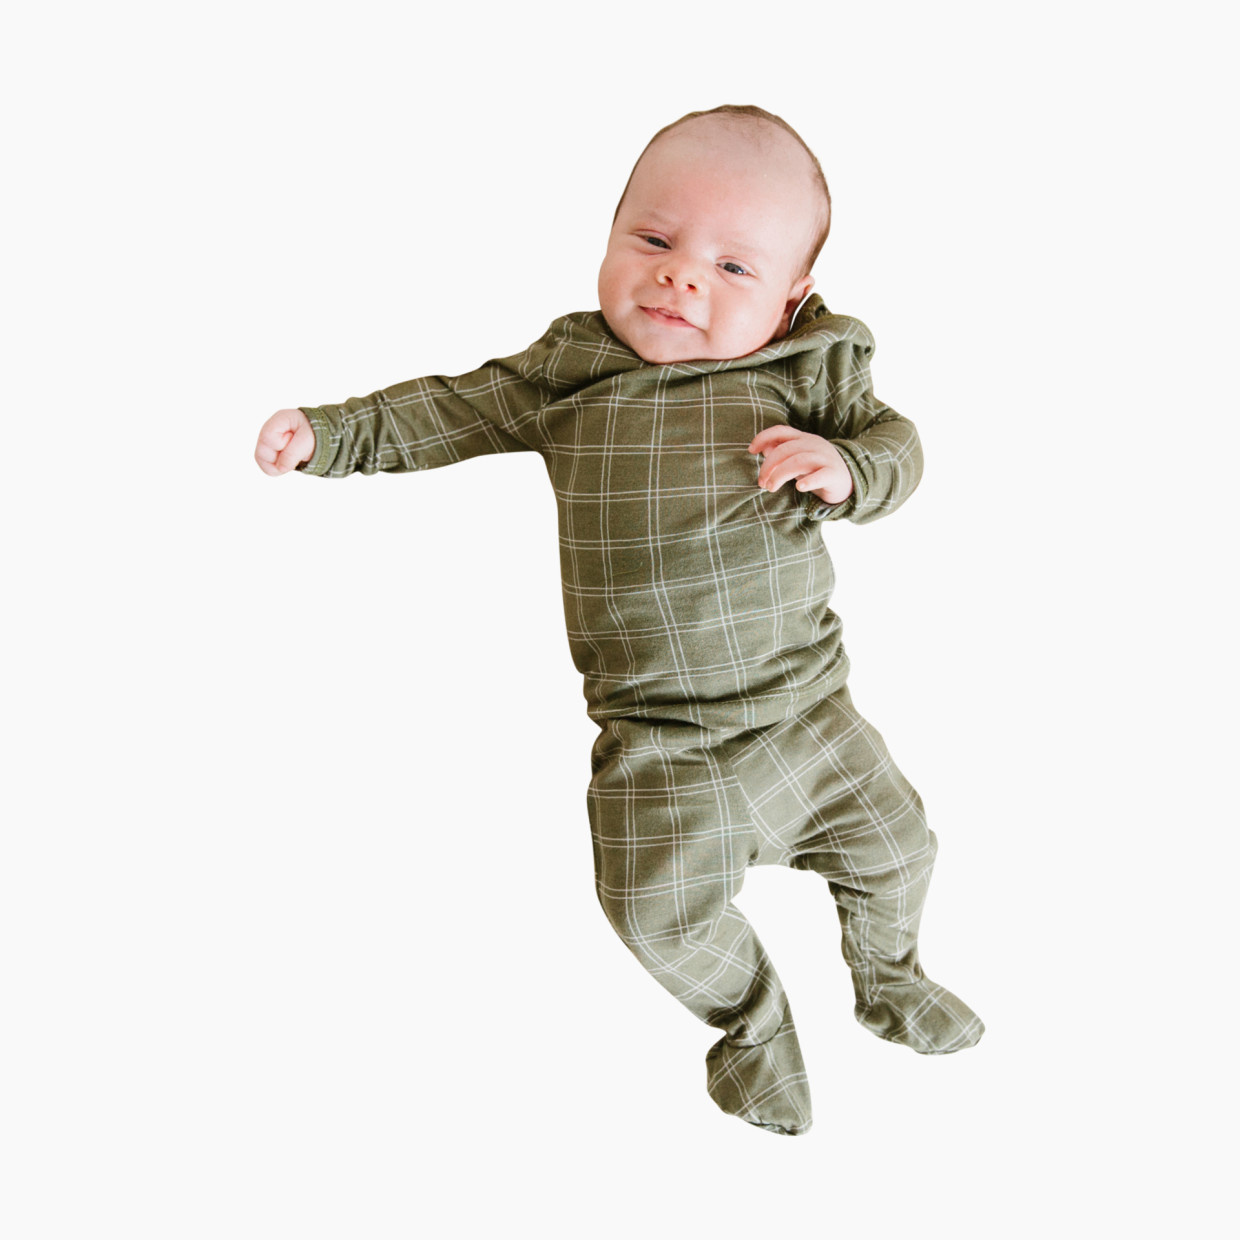 Solly Baby Layette Sleeper Set - Olive Grid, 0-3 months.